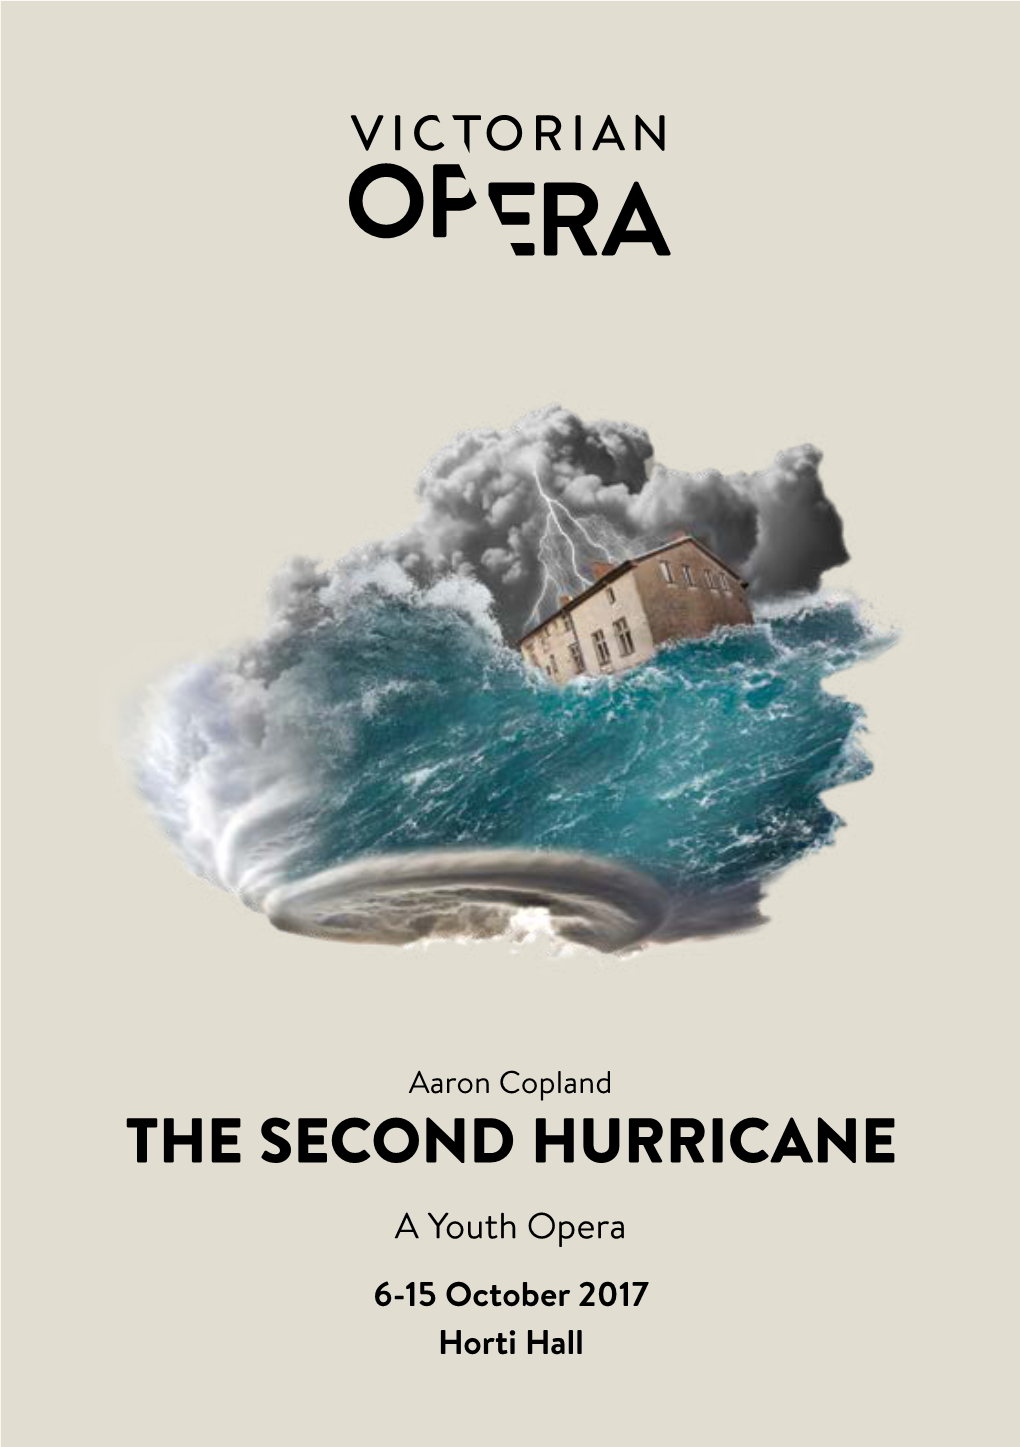 THE SECOND HURRICANE a Youth Opera 6-15 October 2017 Horti Hall DIRECTOR’S MESSAGE PRODUCTION the Second Hurricane the Second Hurricane